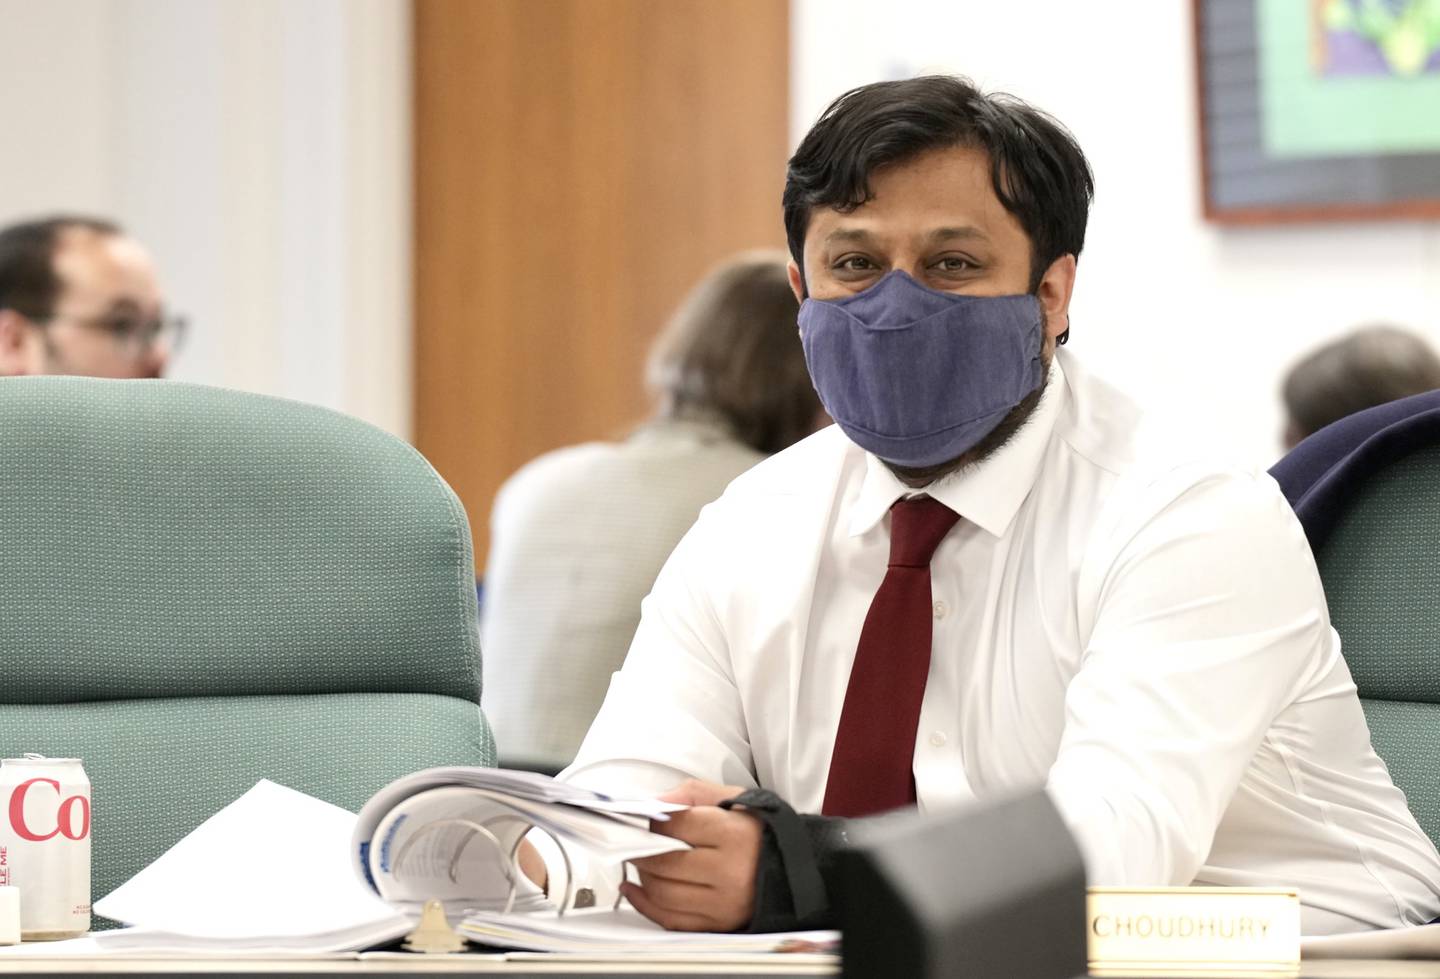 Mohammed Choudhury, state school superintendent, during a state school board meeting on February 28, 2023.